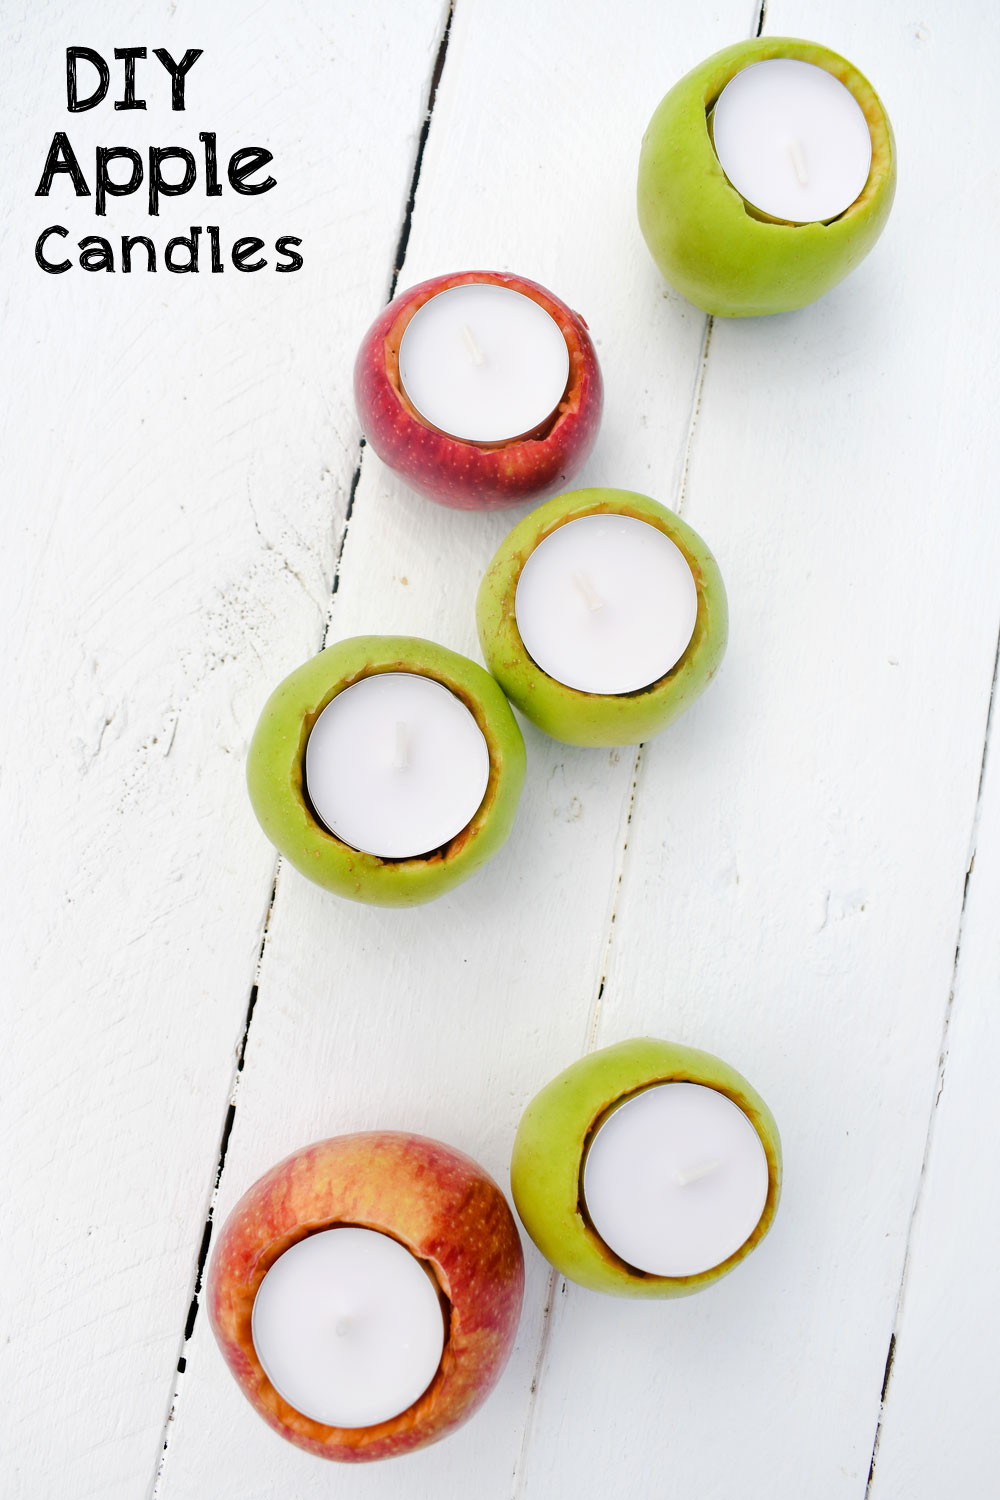 Easy DIY apple candles fall craft and decorating idea